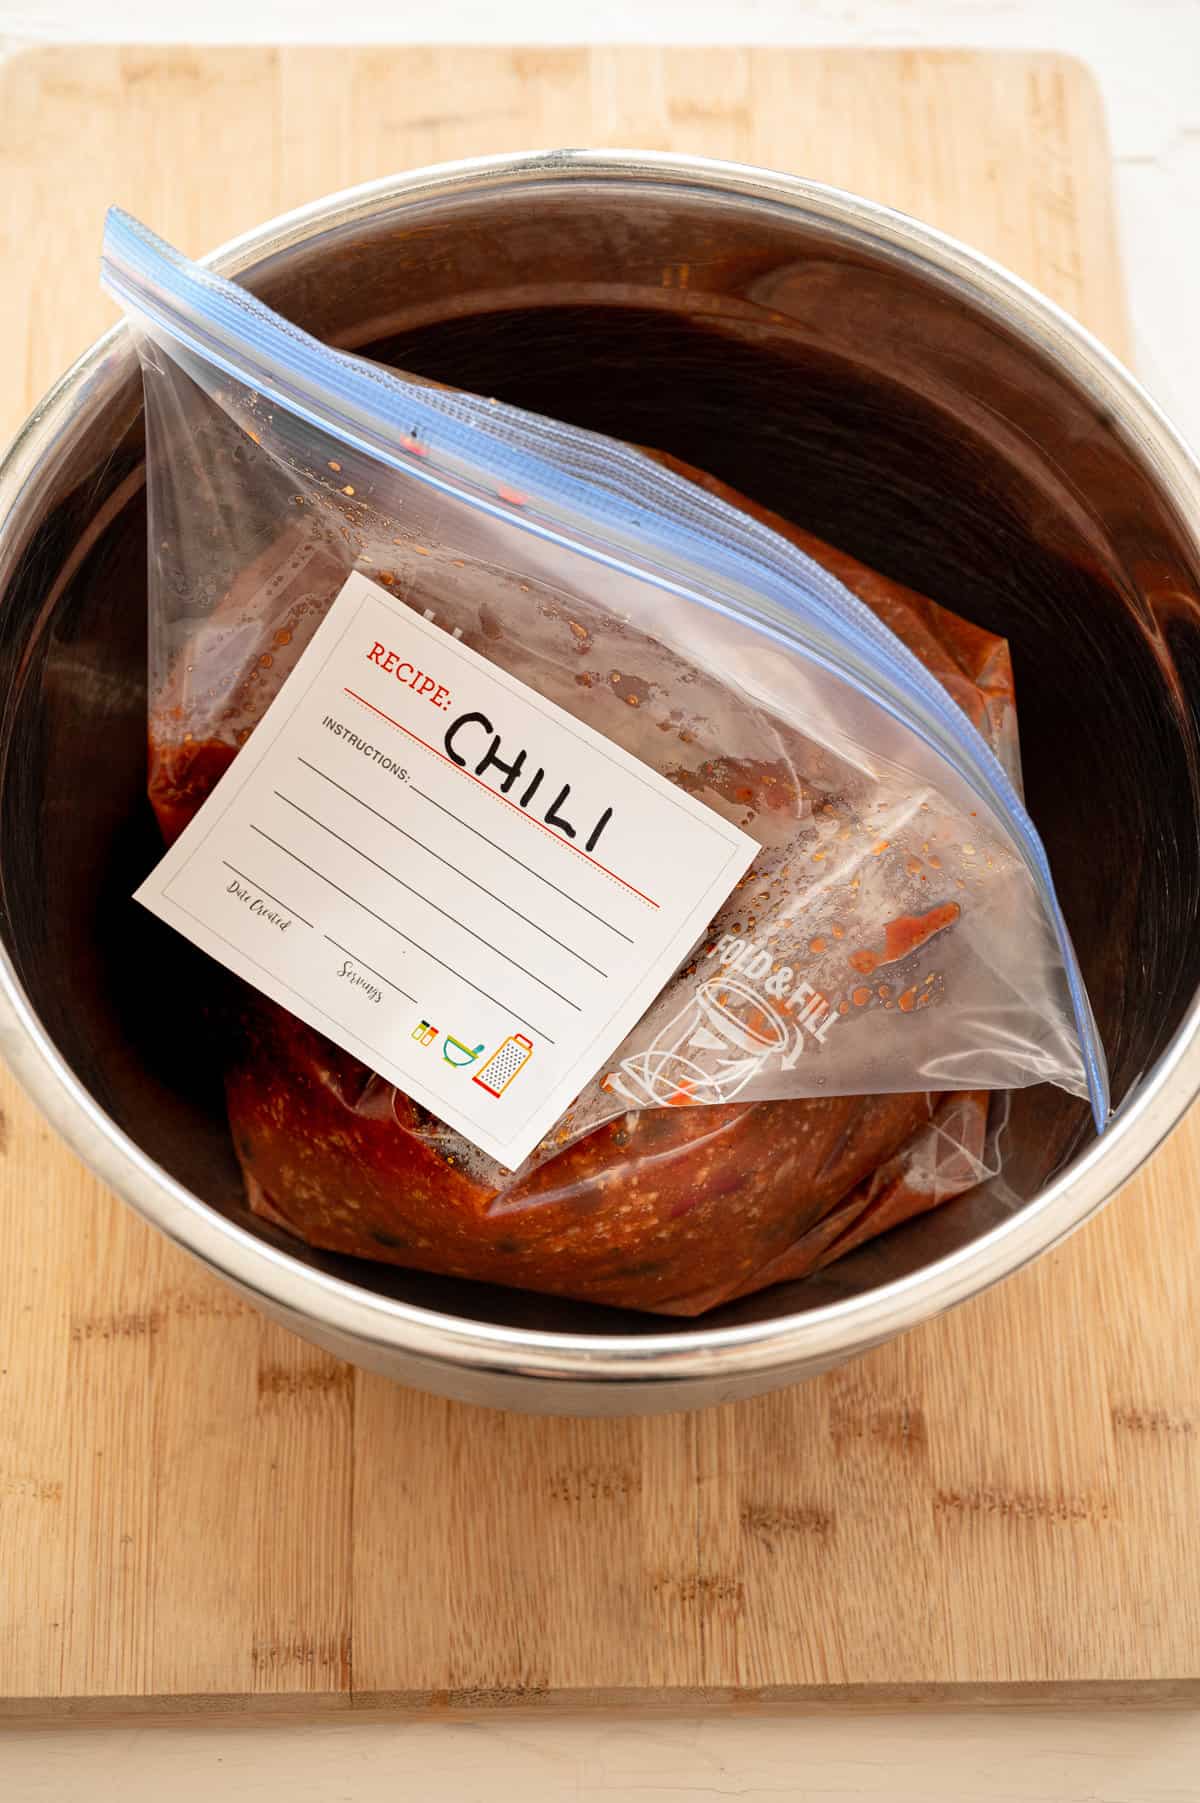 Chili bagged up and placed in an instant pot insert to prepare for freezing.